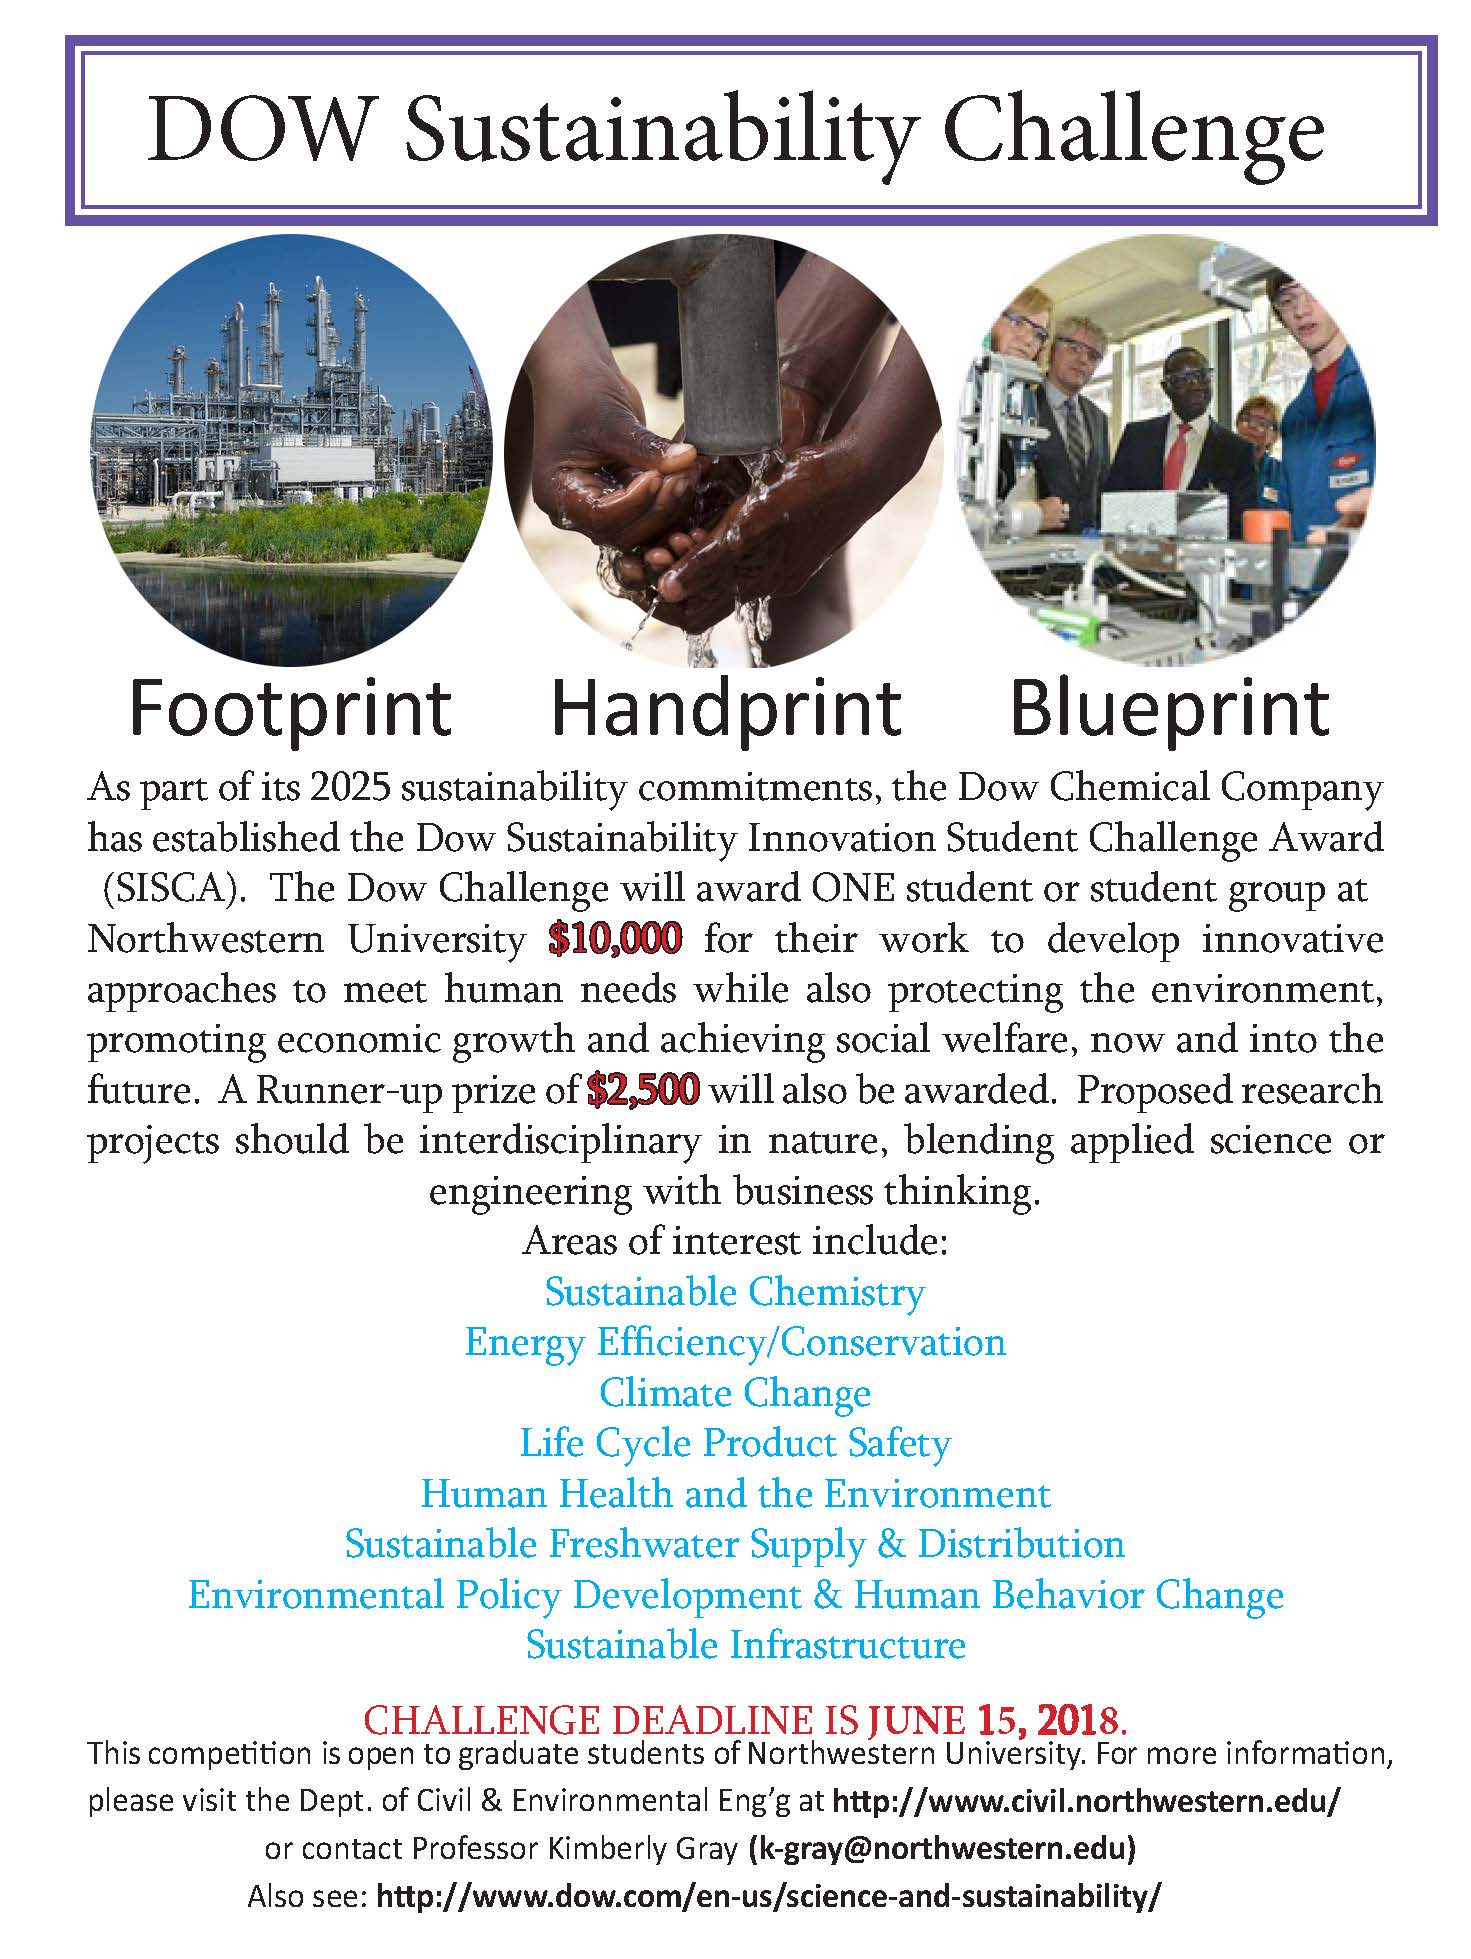 DOW Sustainability Flyer